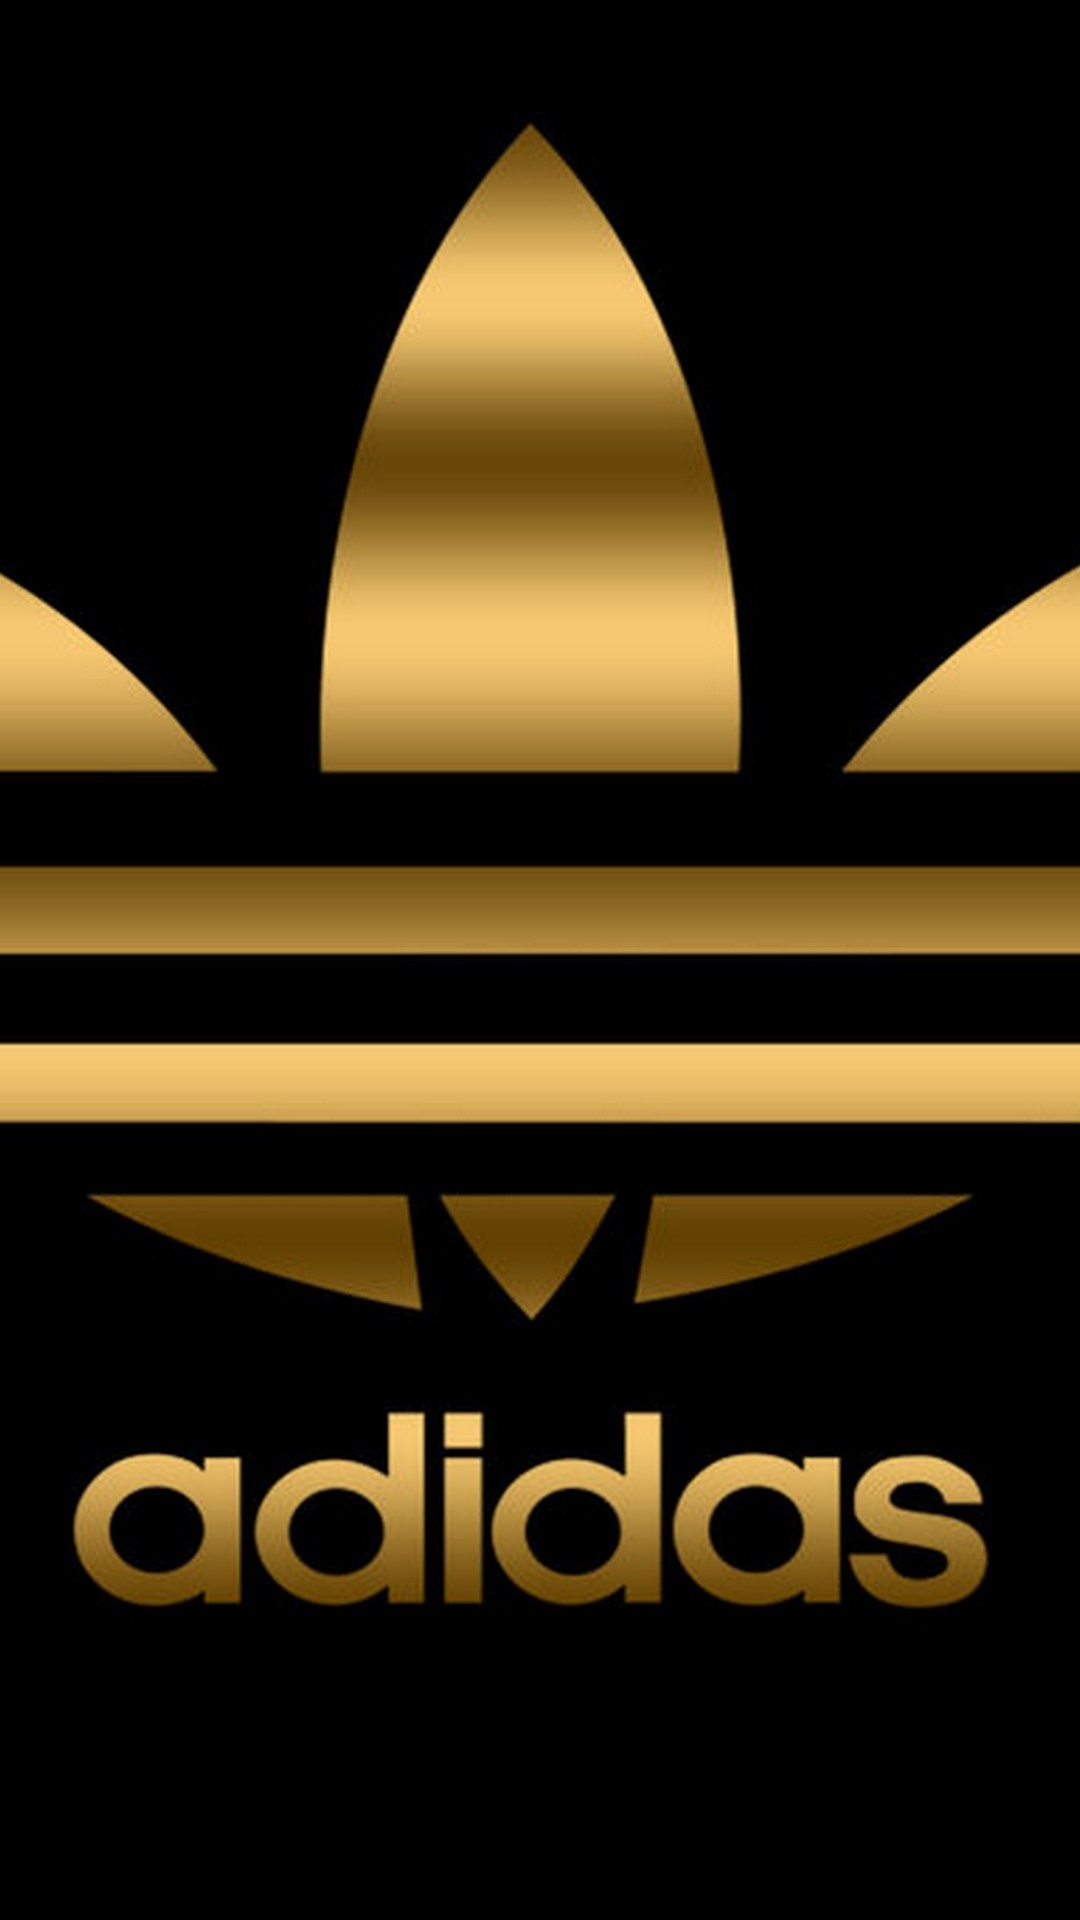 Adidas Logo Backgrounds For Android With high-resolution 1080X1920 pixel. You can use this wallpaper for your Android backgrounds, Tablet, Samsung Screensavers, Mobile Phone Lock Screen and another Smartphones device